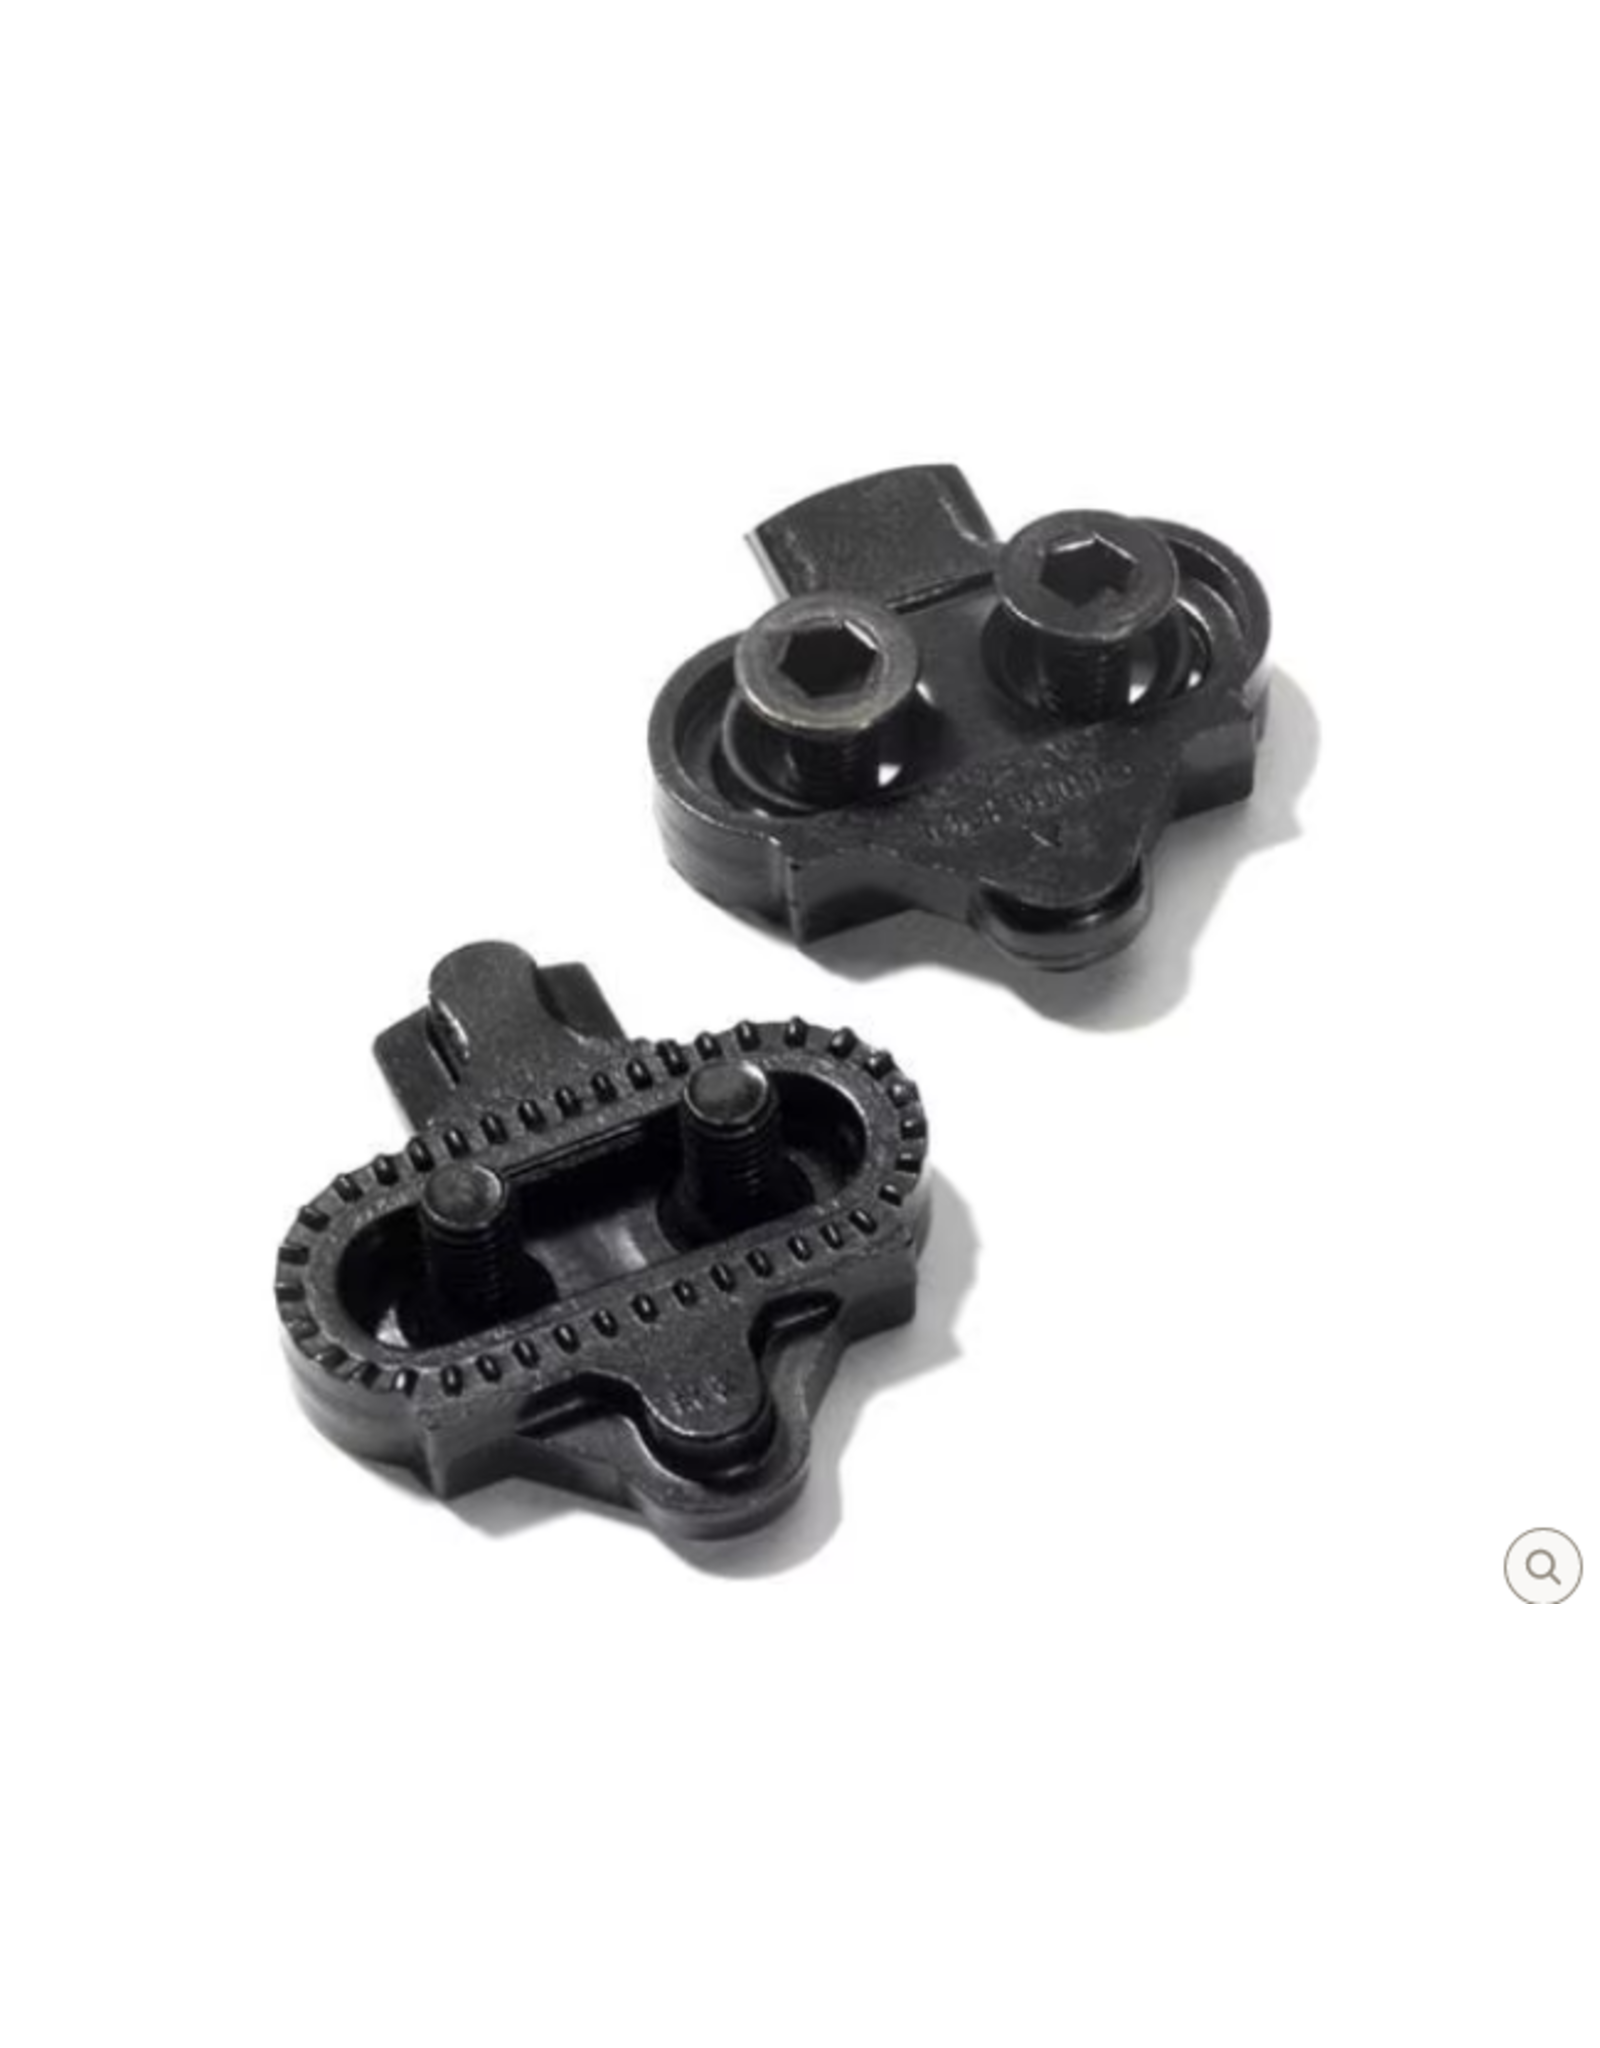 Shimano Shimano SM-SH51 Cleat Set w/o Cleat Nut (Multiple Release  Mode)